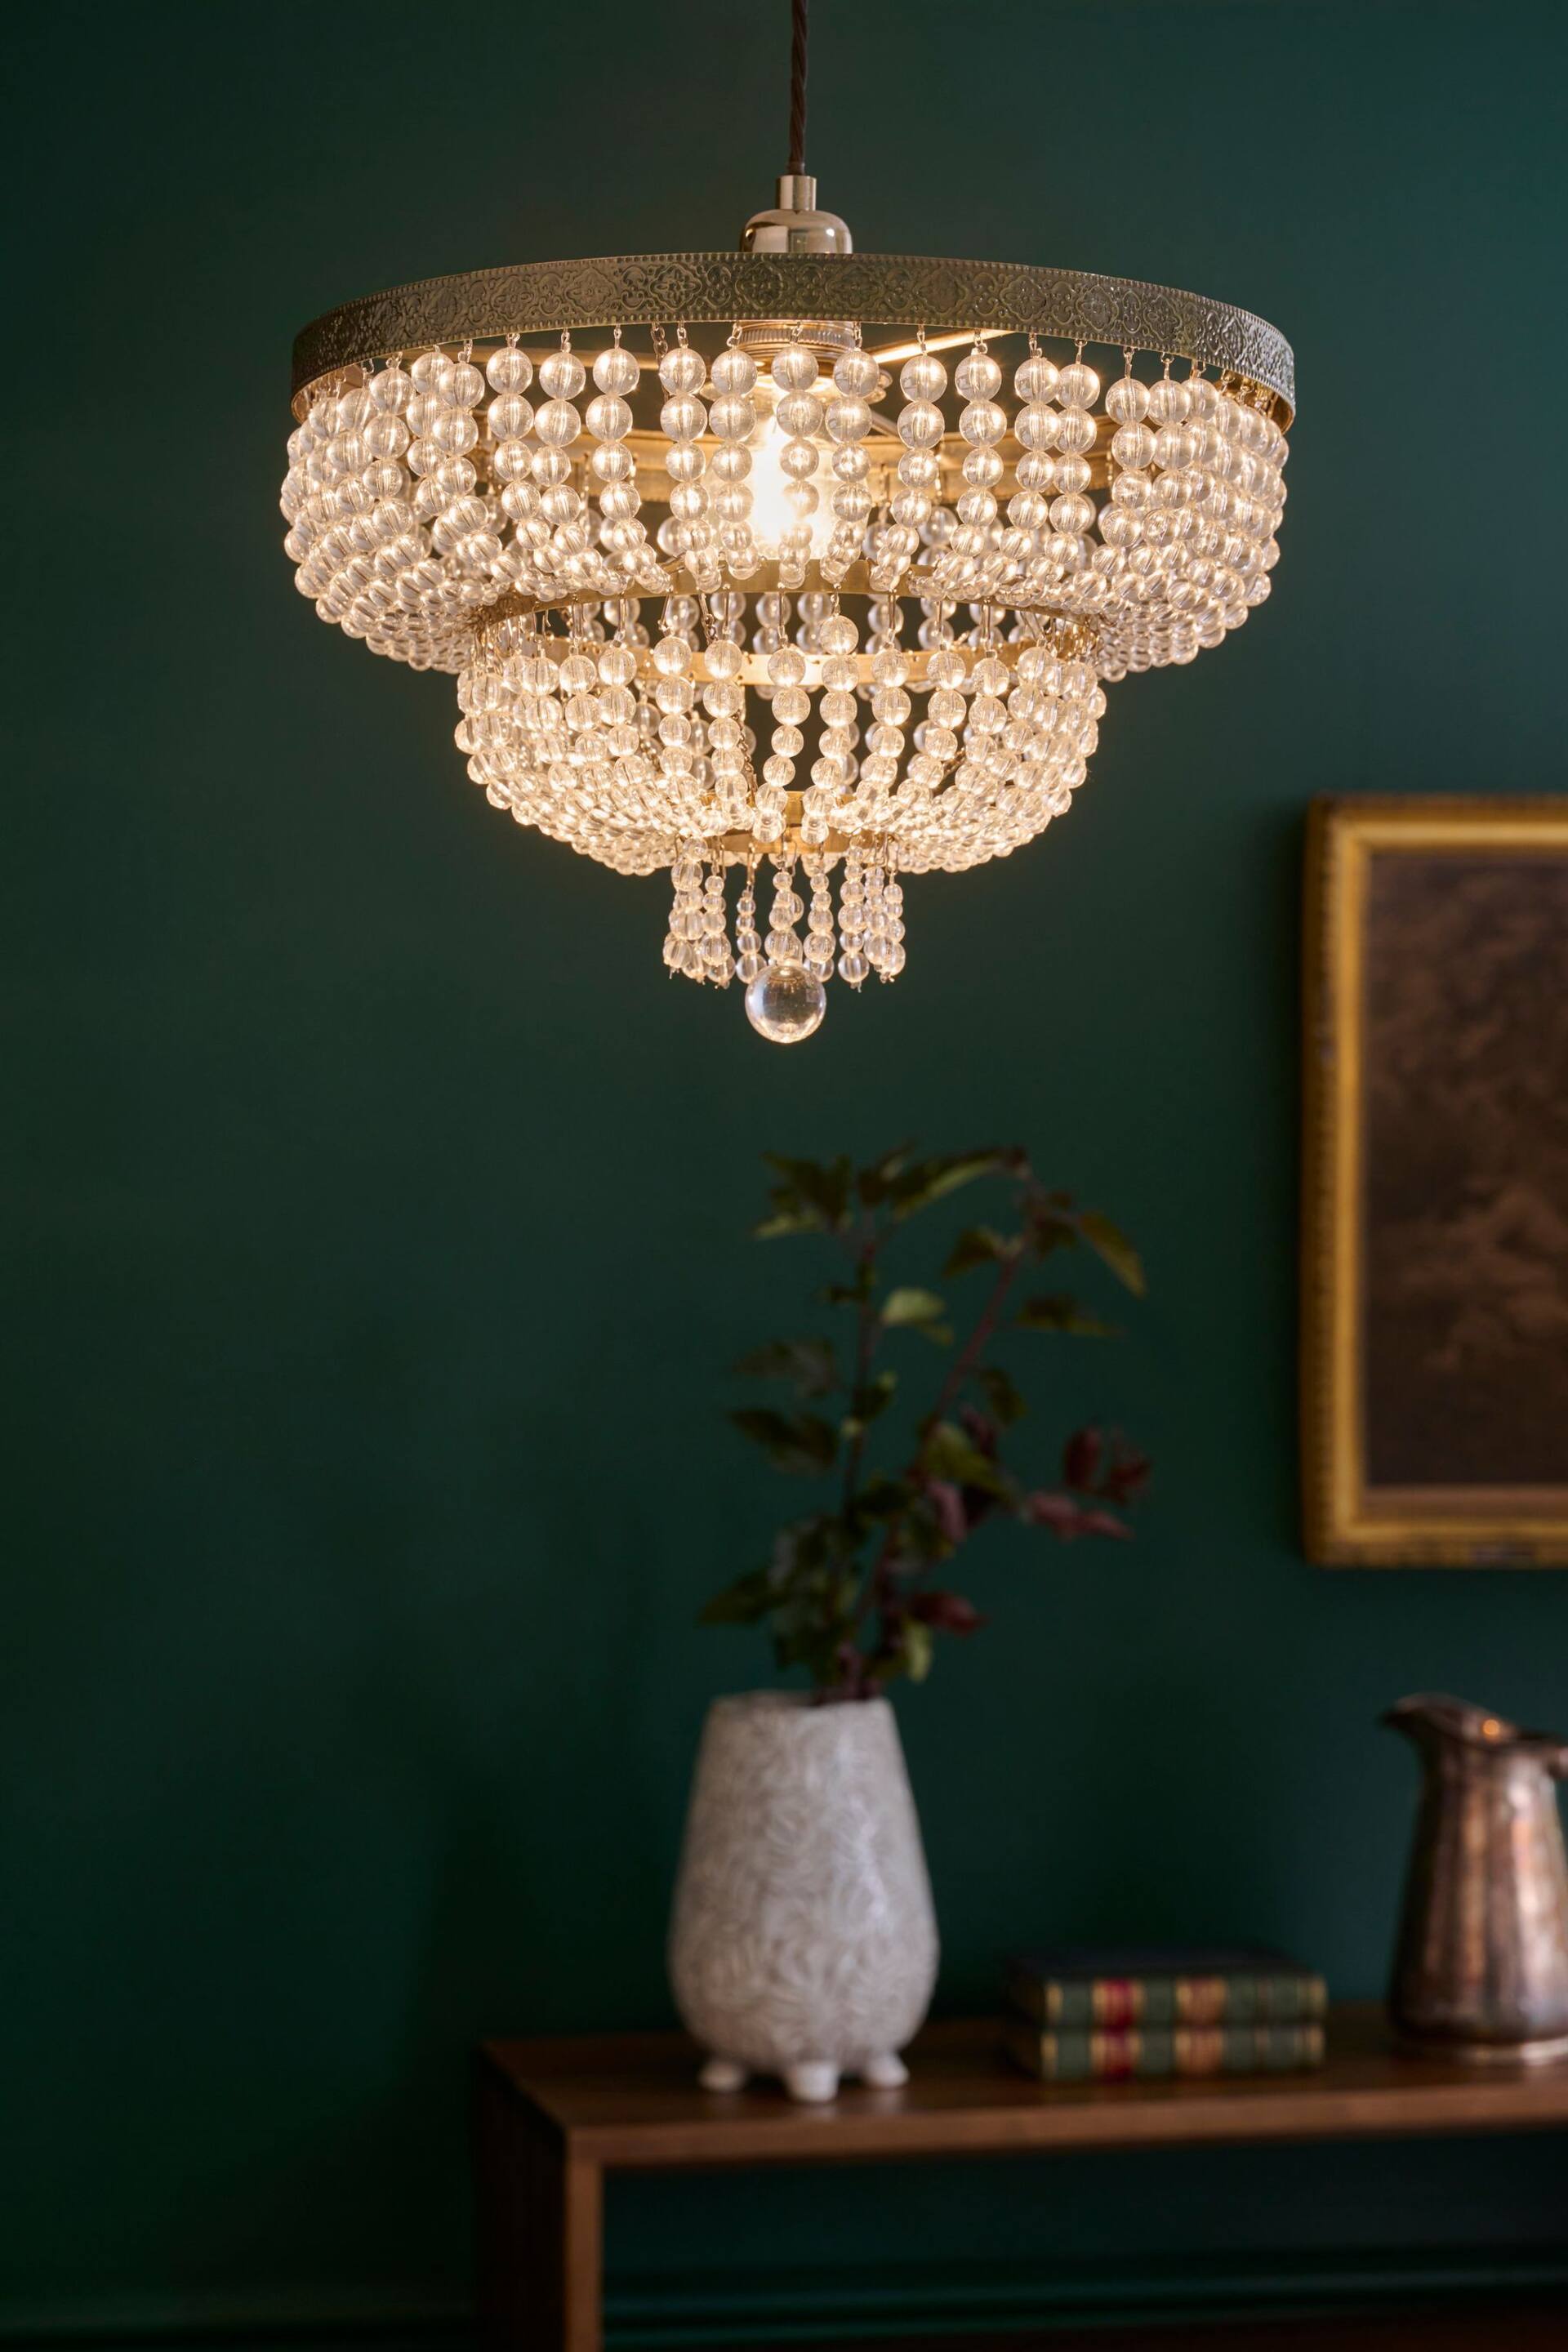 Clear Bamburgh Easy Fit Pendant Lamp Shade - Image 1 of 5